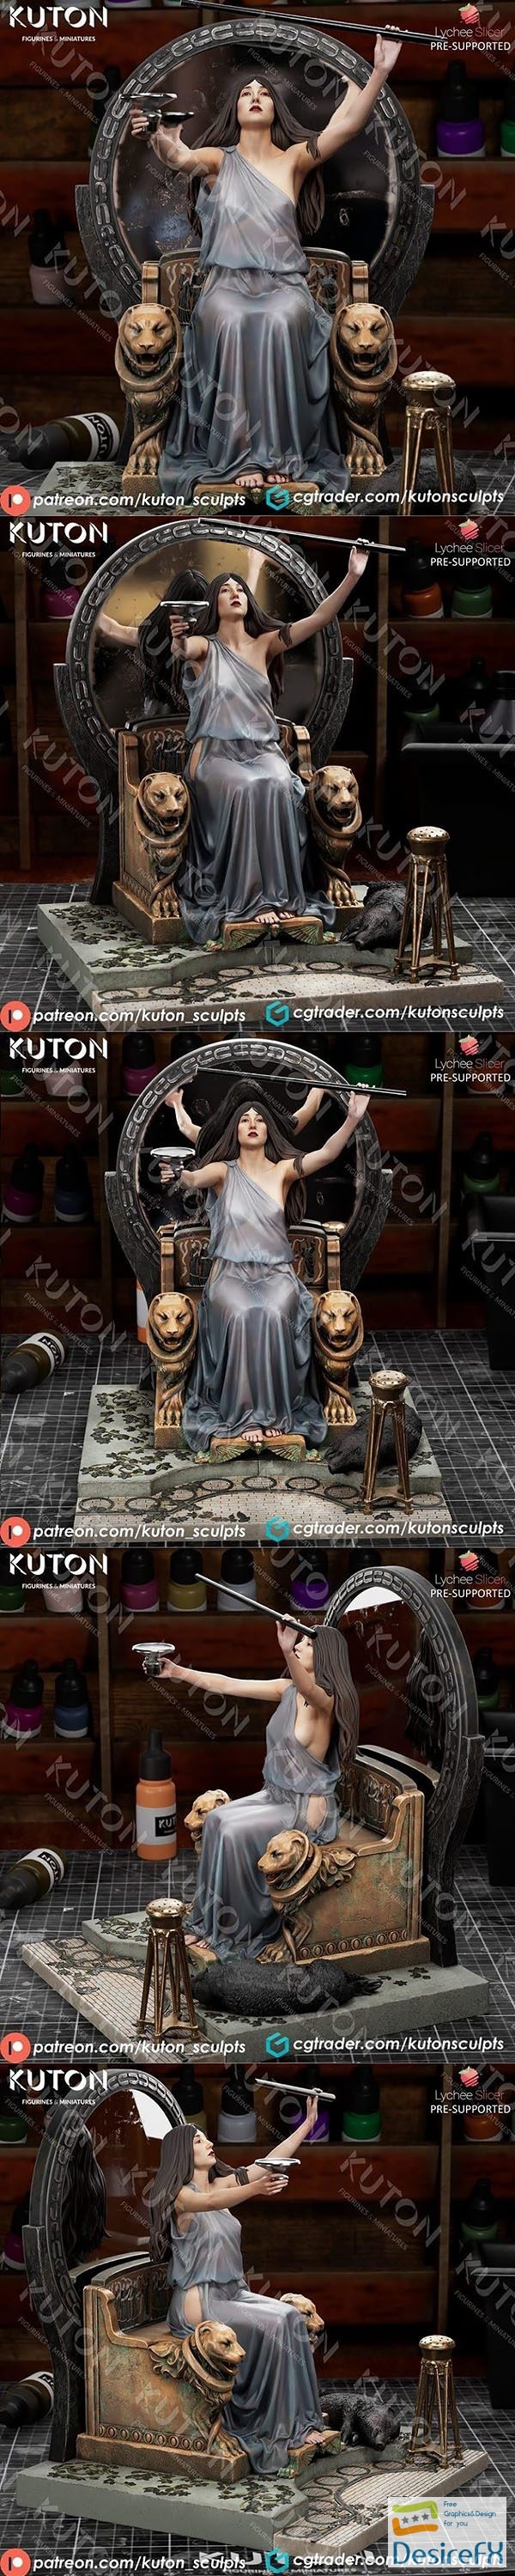 Kuton Figurines – Circe Offering the Cup to Ulysses – 3D Print